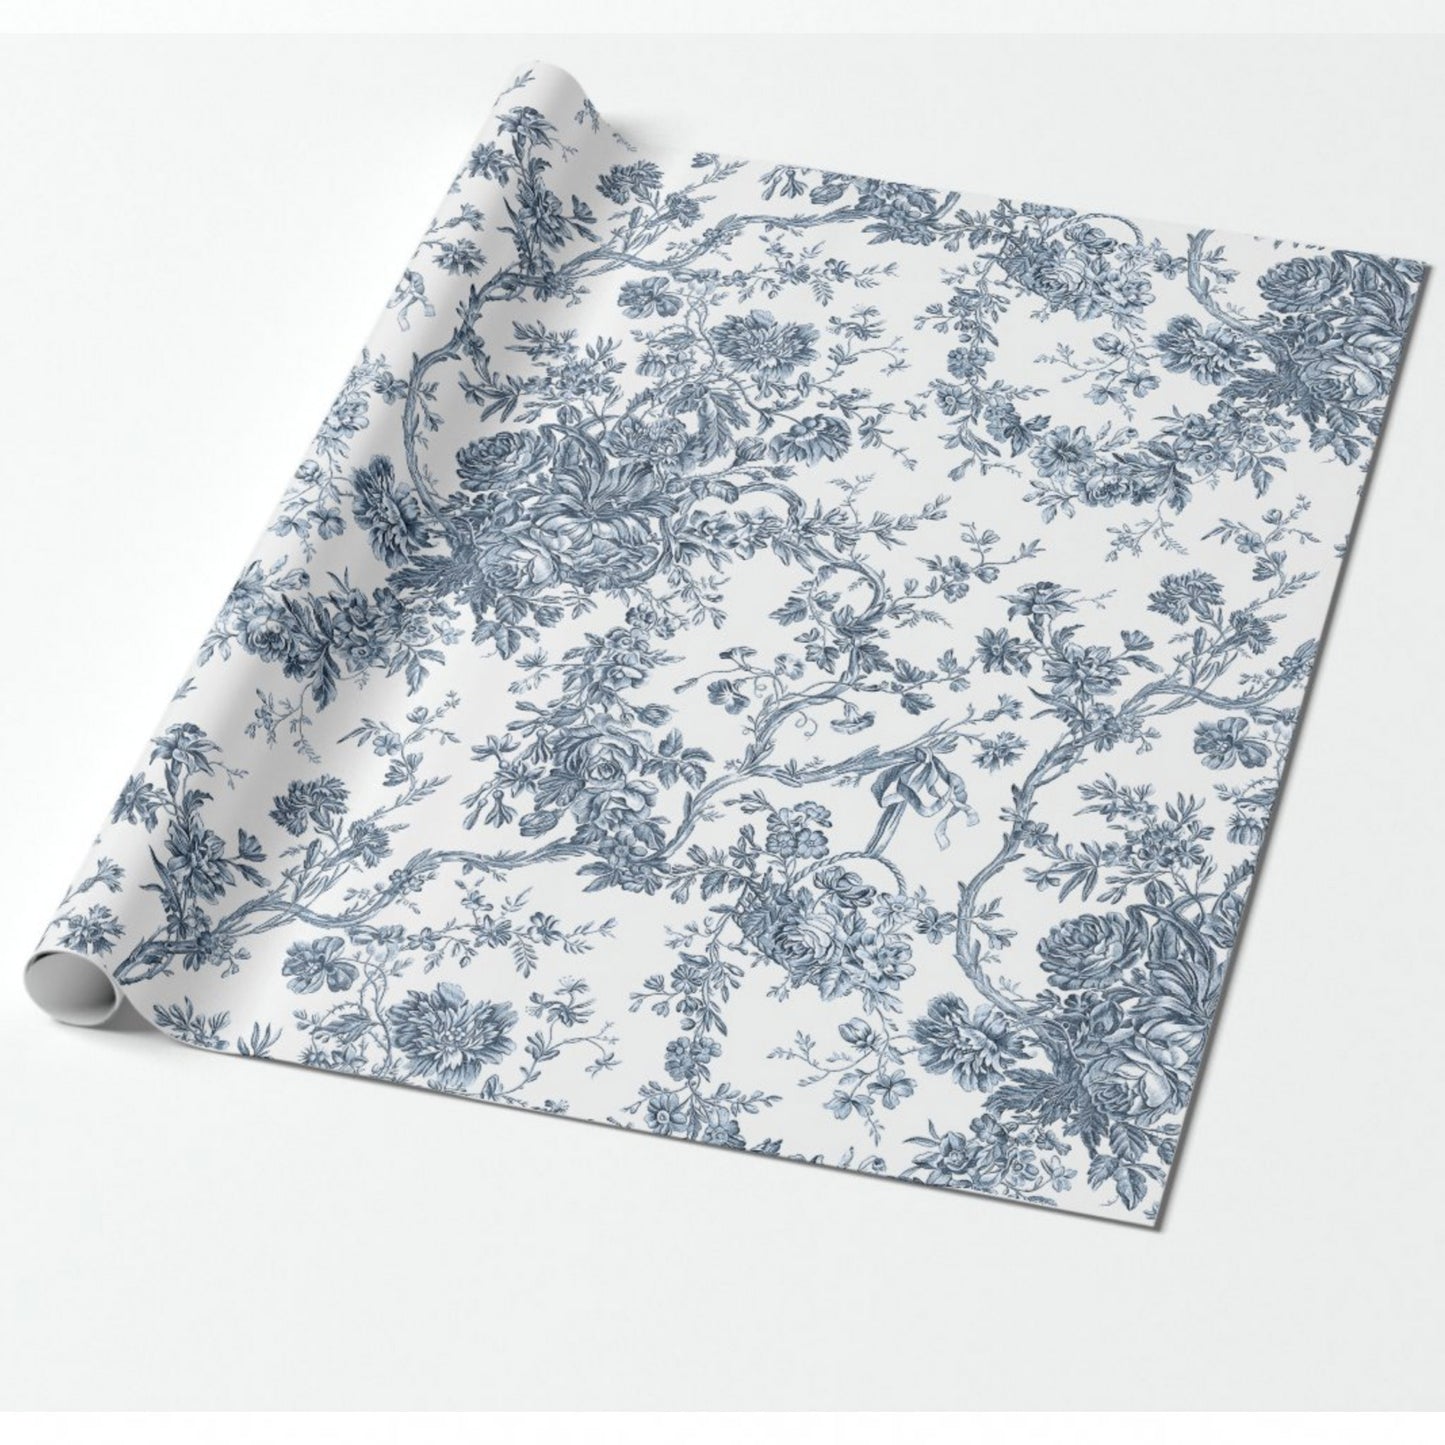 Elegant Vintage French Engraved Floral Toile-Blue Wrapping Paper Roll